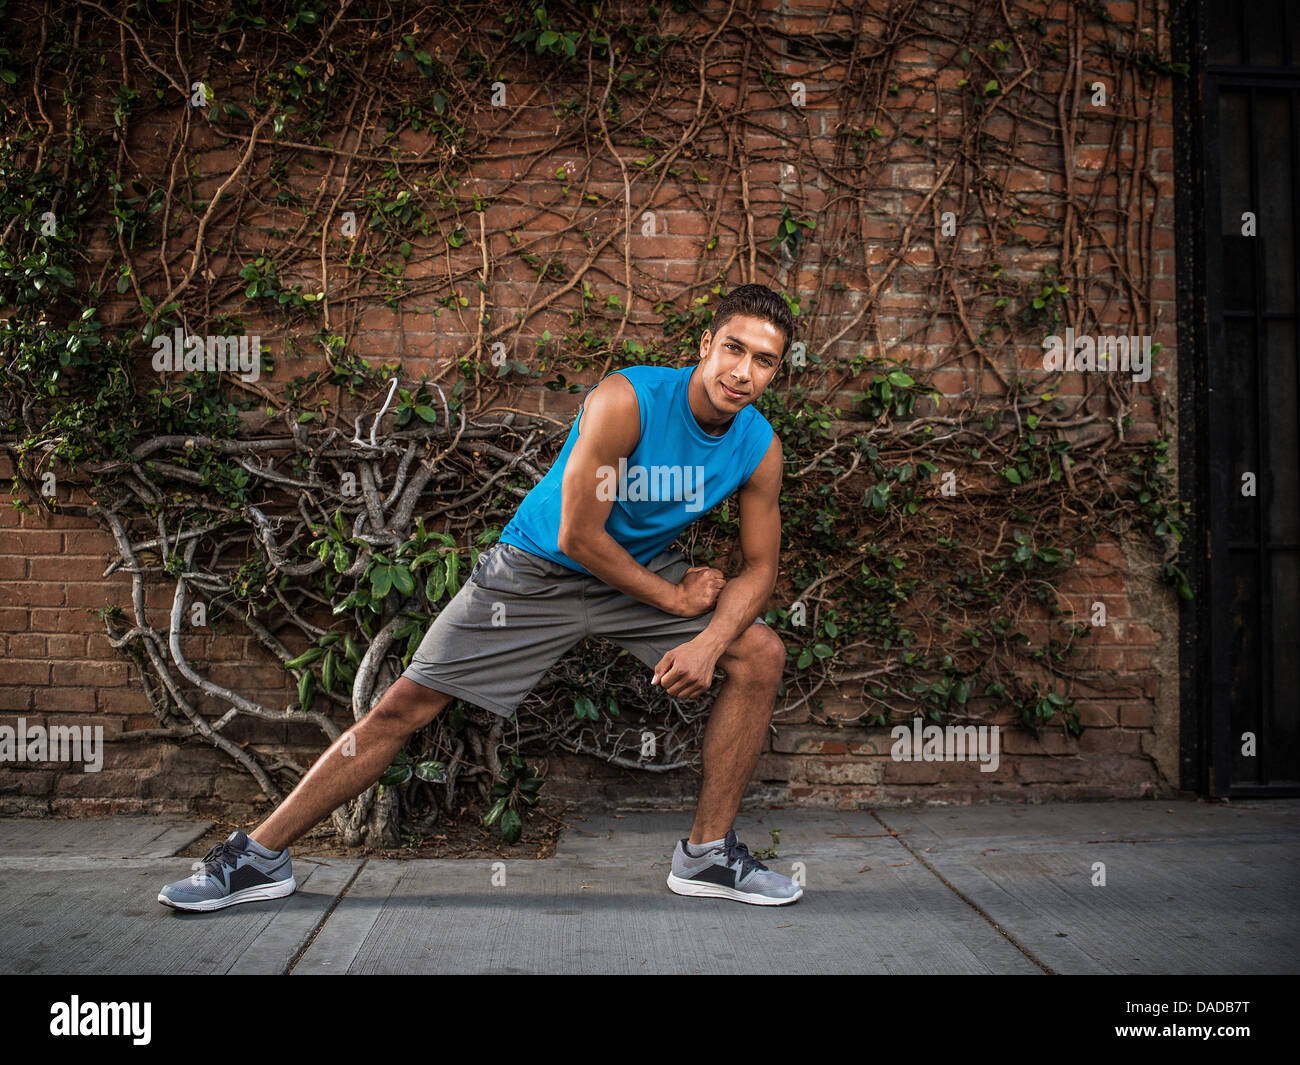 Man stretching before exercise Stock Photo